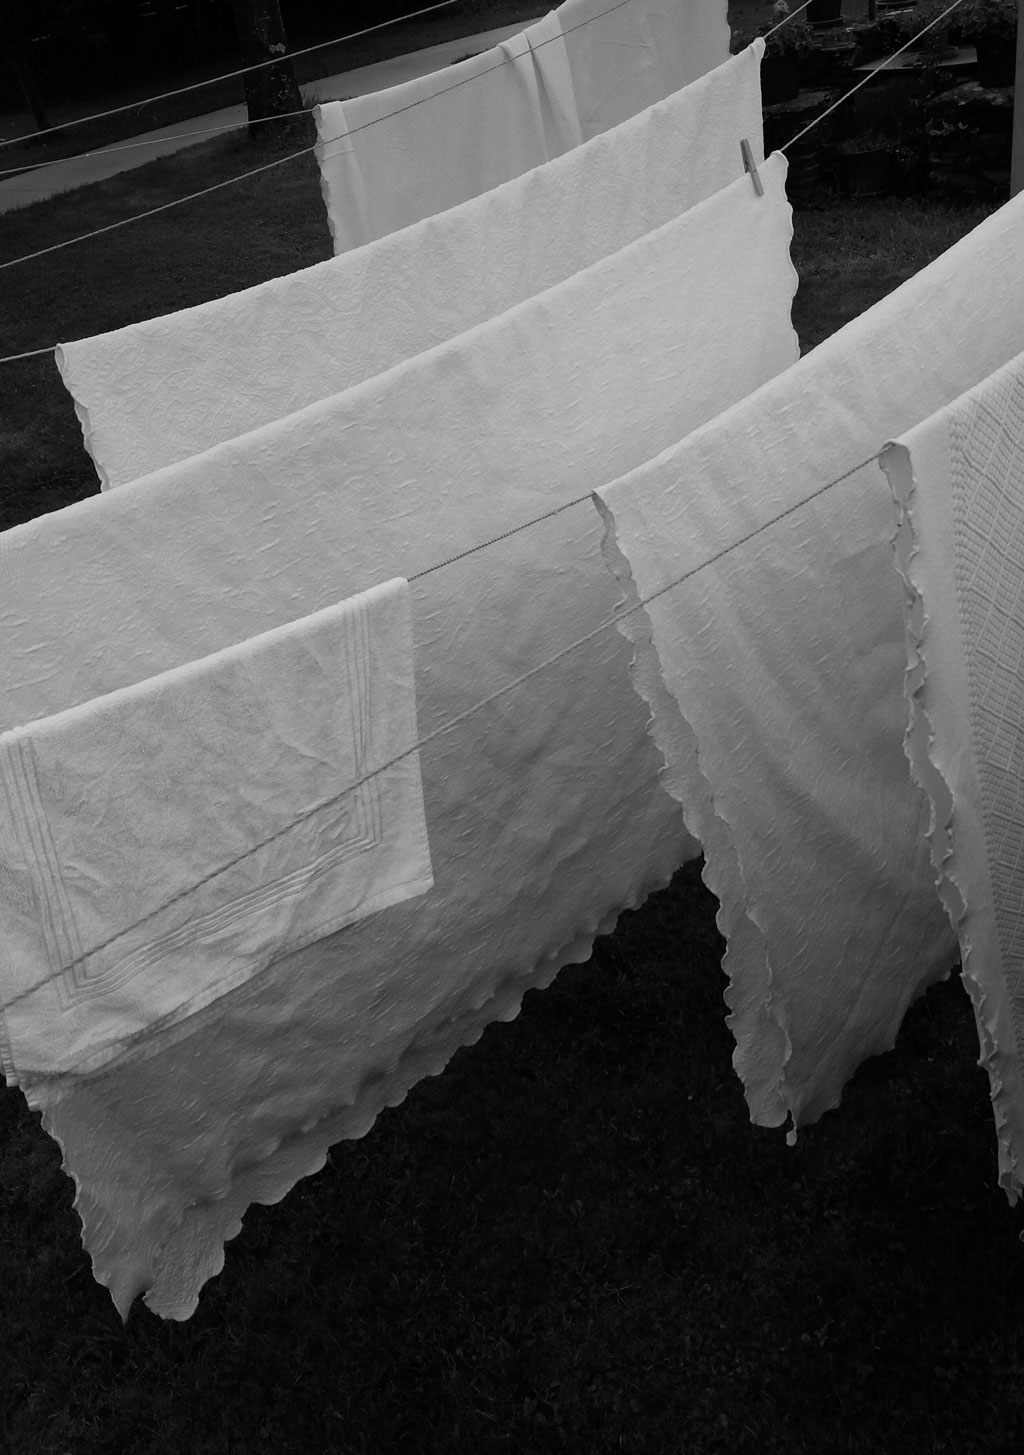 White linens hanging on clothes lines